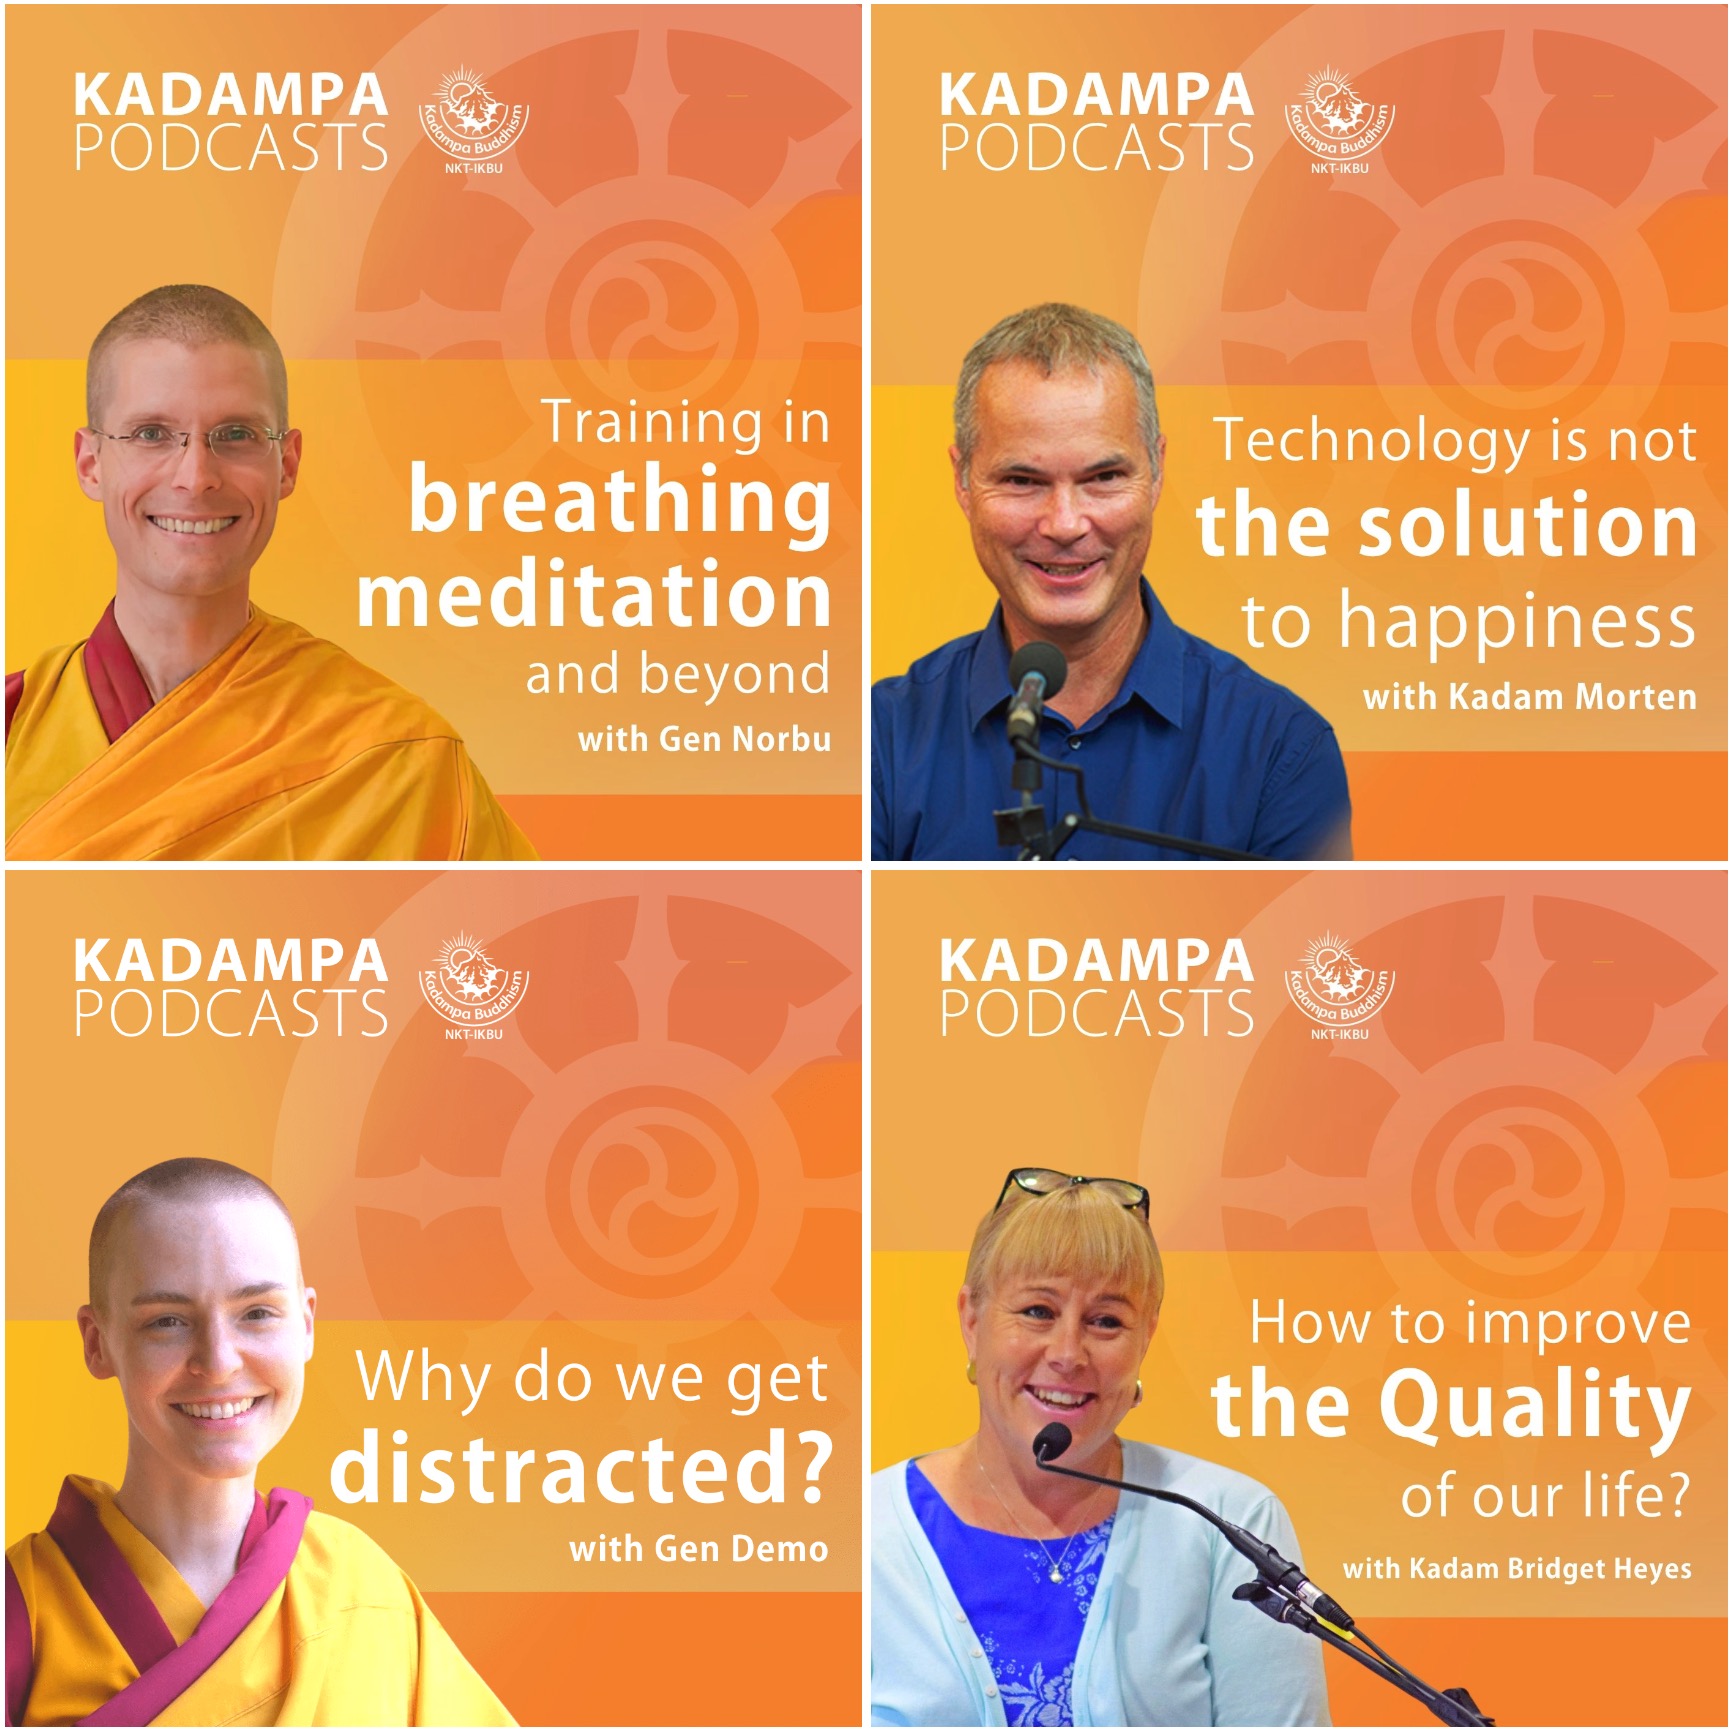 Catch-up with the ‘Living Clarity’ Kadampa podcast